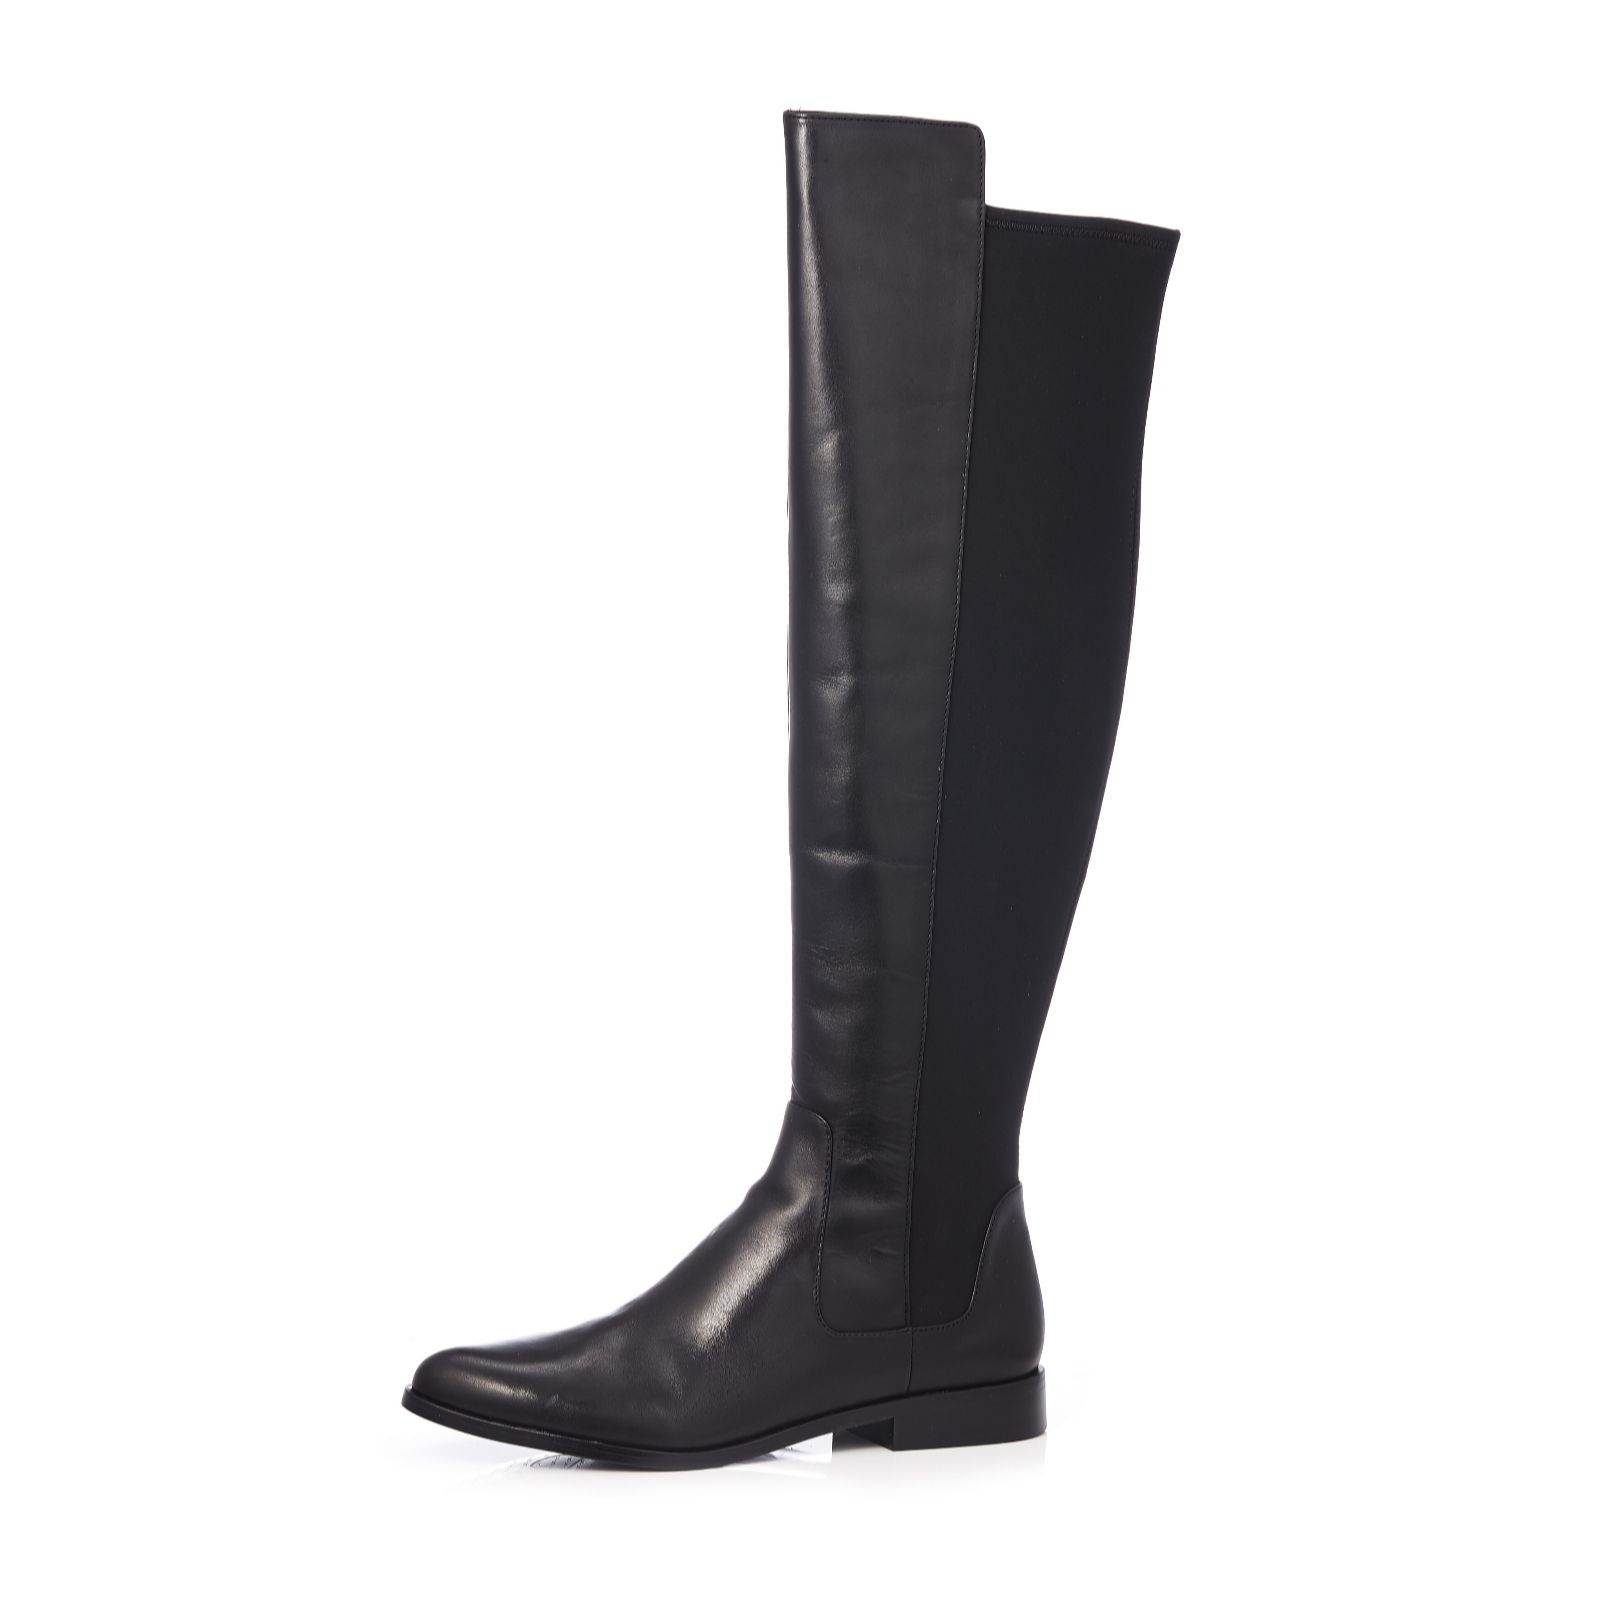 clarks over the knee boots uk